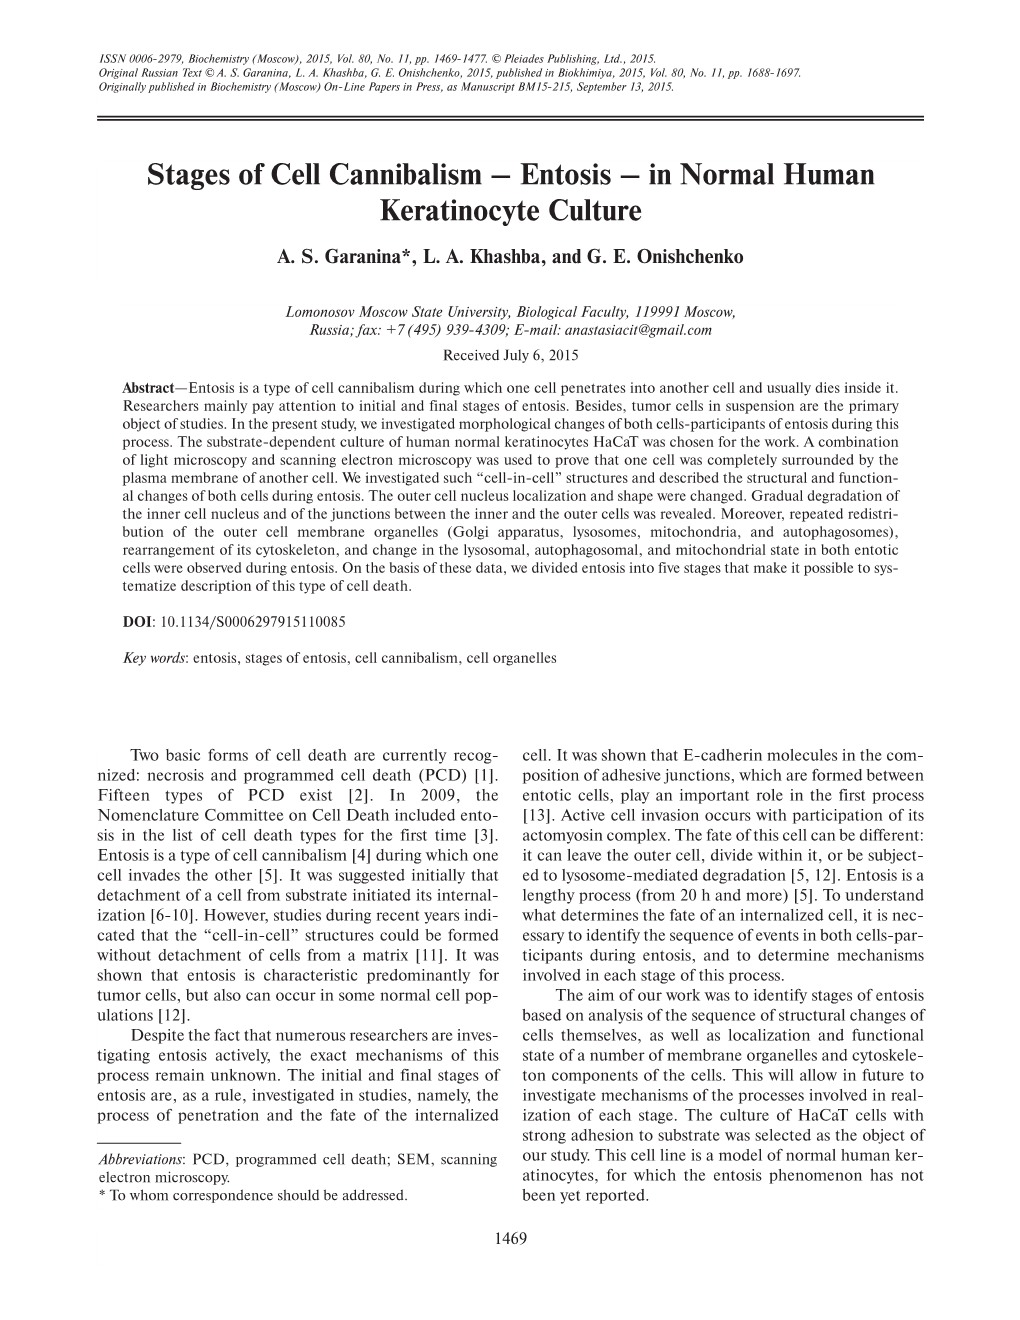 Stages of Cell Cannibalism – Entosis – in Normal Human Keratinocyte Culture